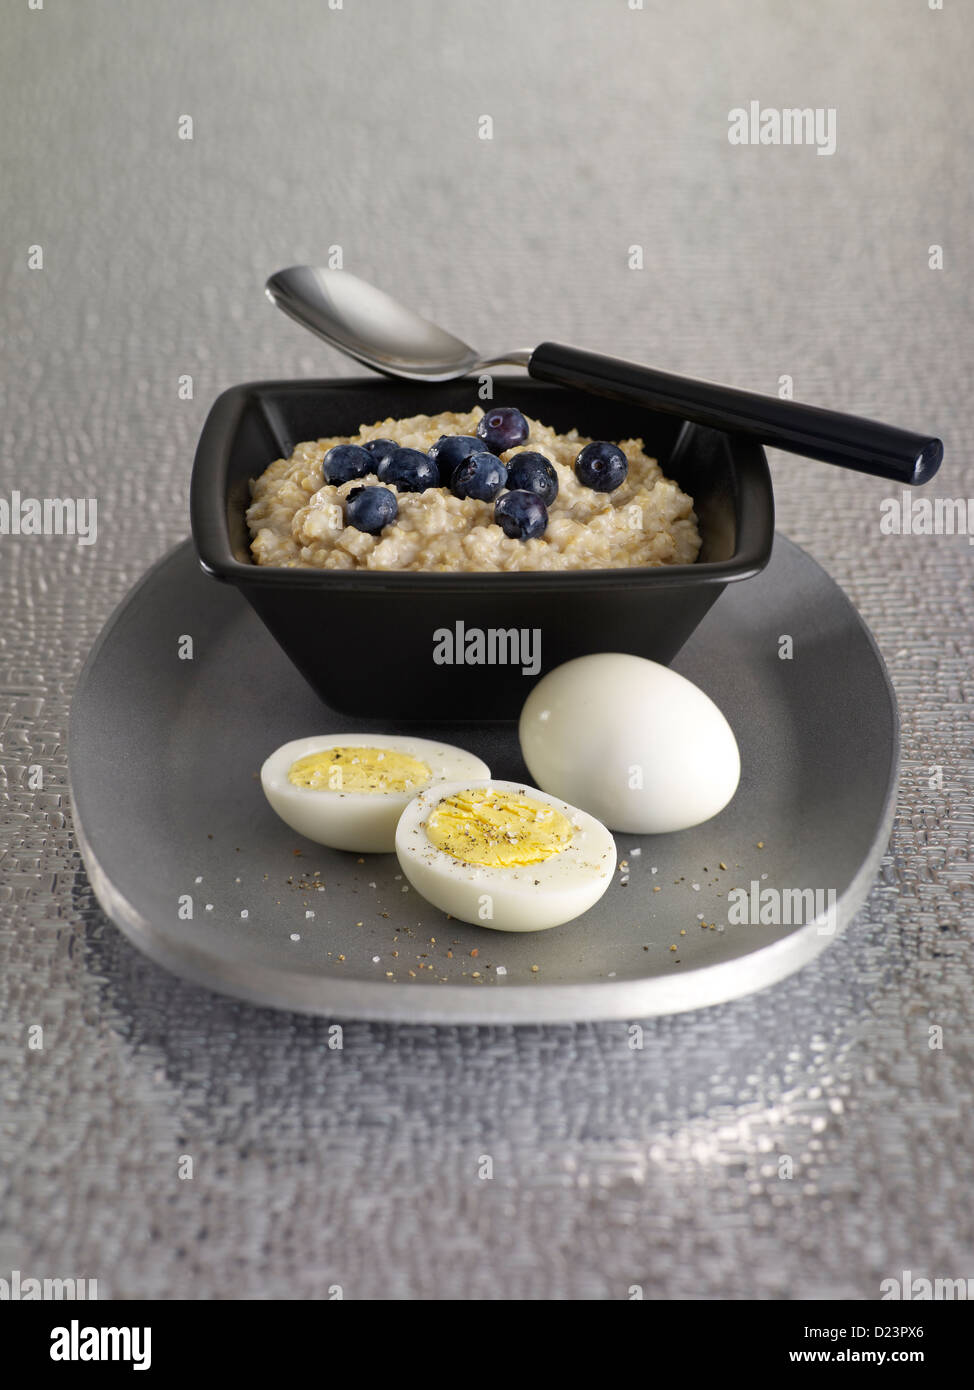 Oatmeal topped with blueberries and served with hard boiled eggs Stock Photo